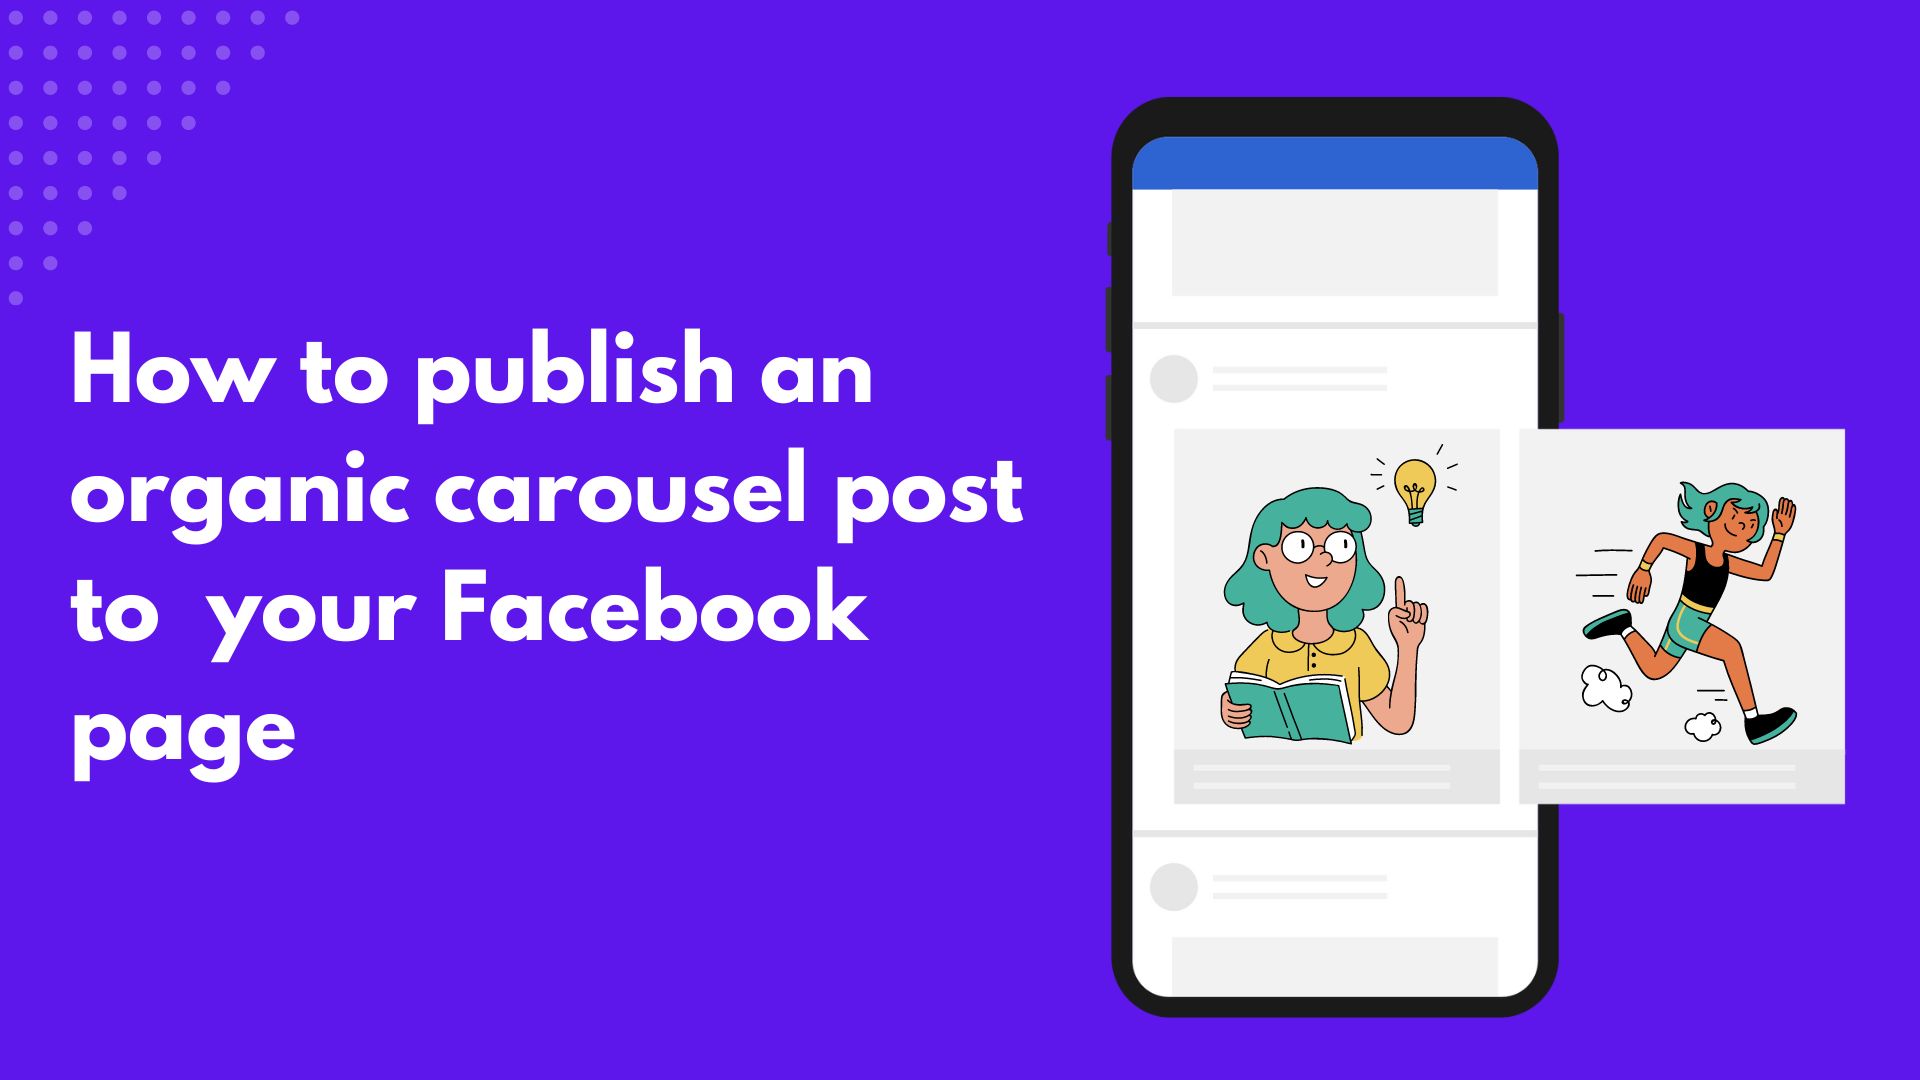 How to publish an organic carousel post on your Facebook page